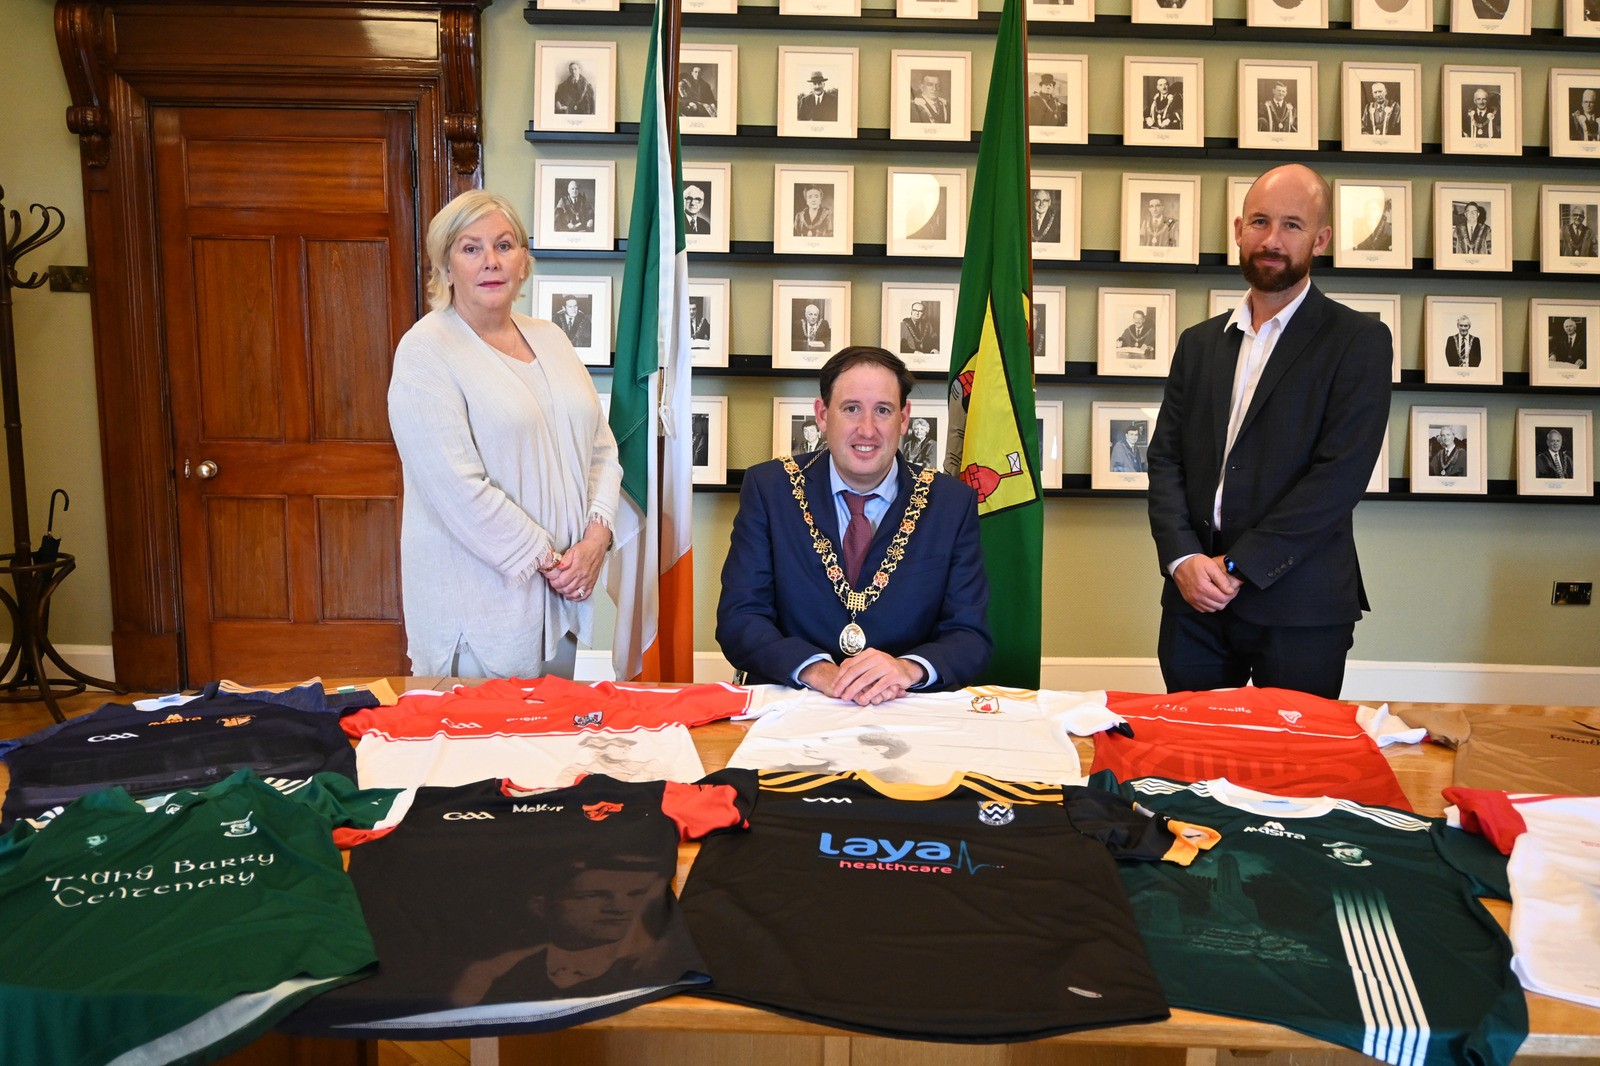 The Lord Mayor, Cllr. Kieran McCarthy, Chief Executive Ann Doherty, and Kevin O'Donovan of Cork GAA at the pre-launch of the commemorative jersey exhibition